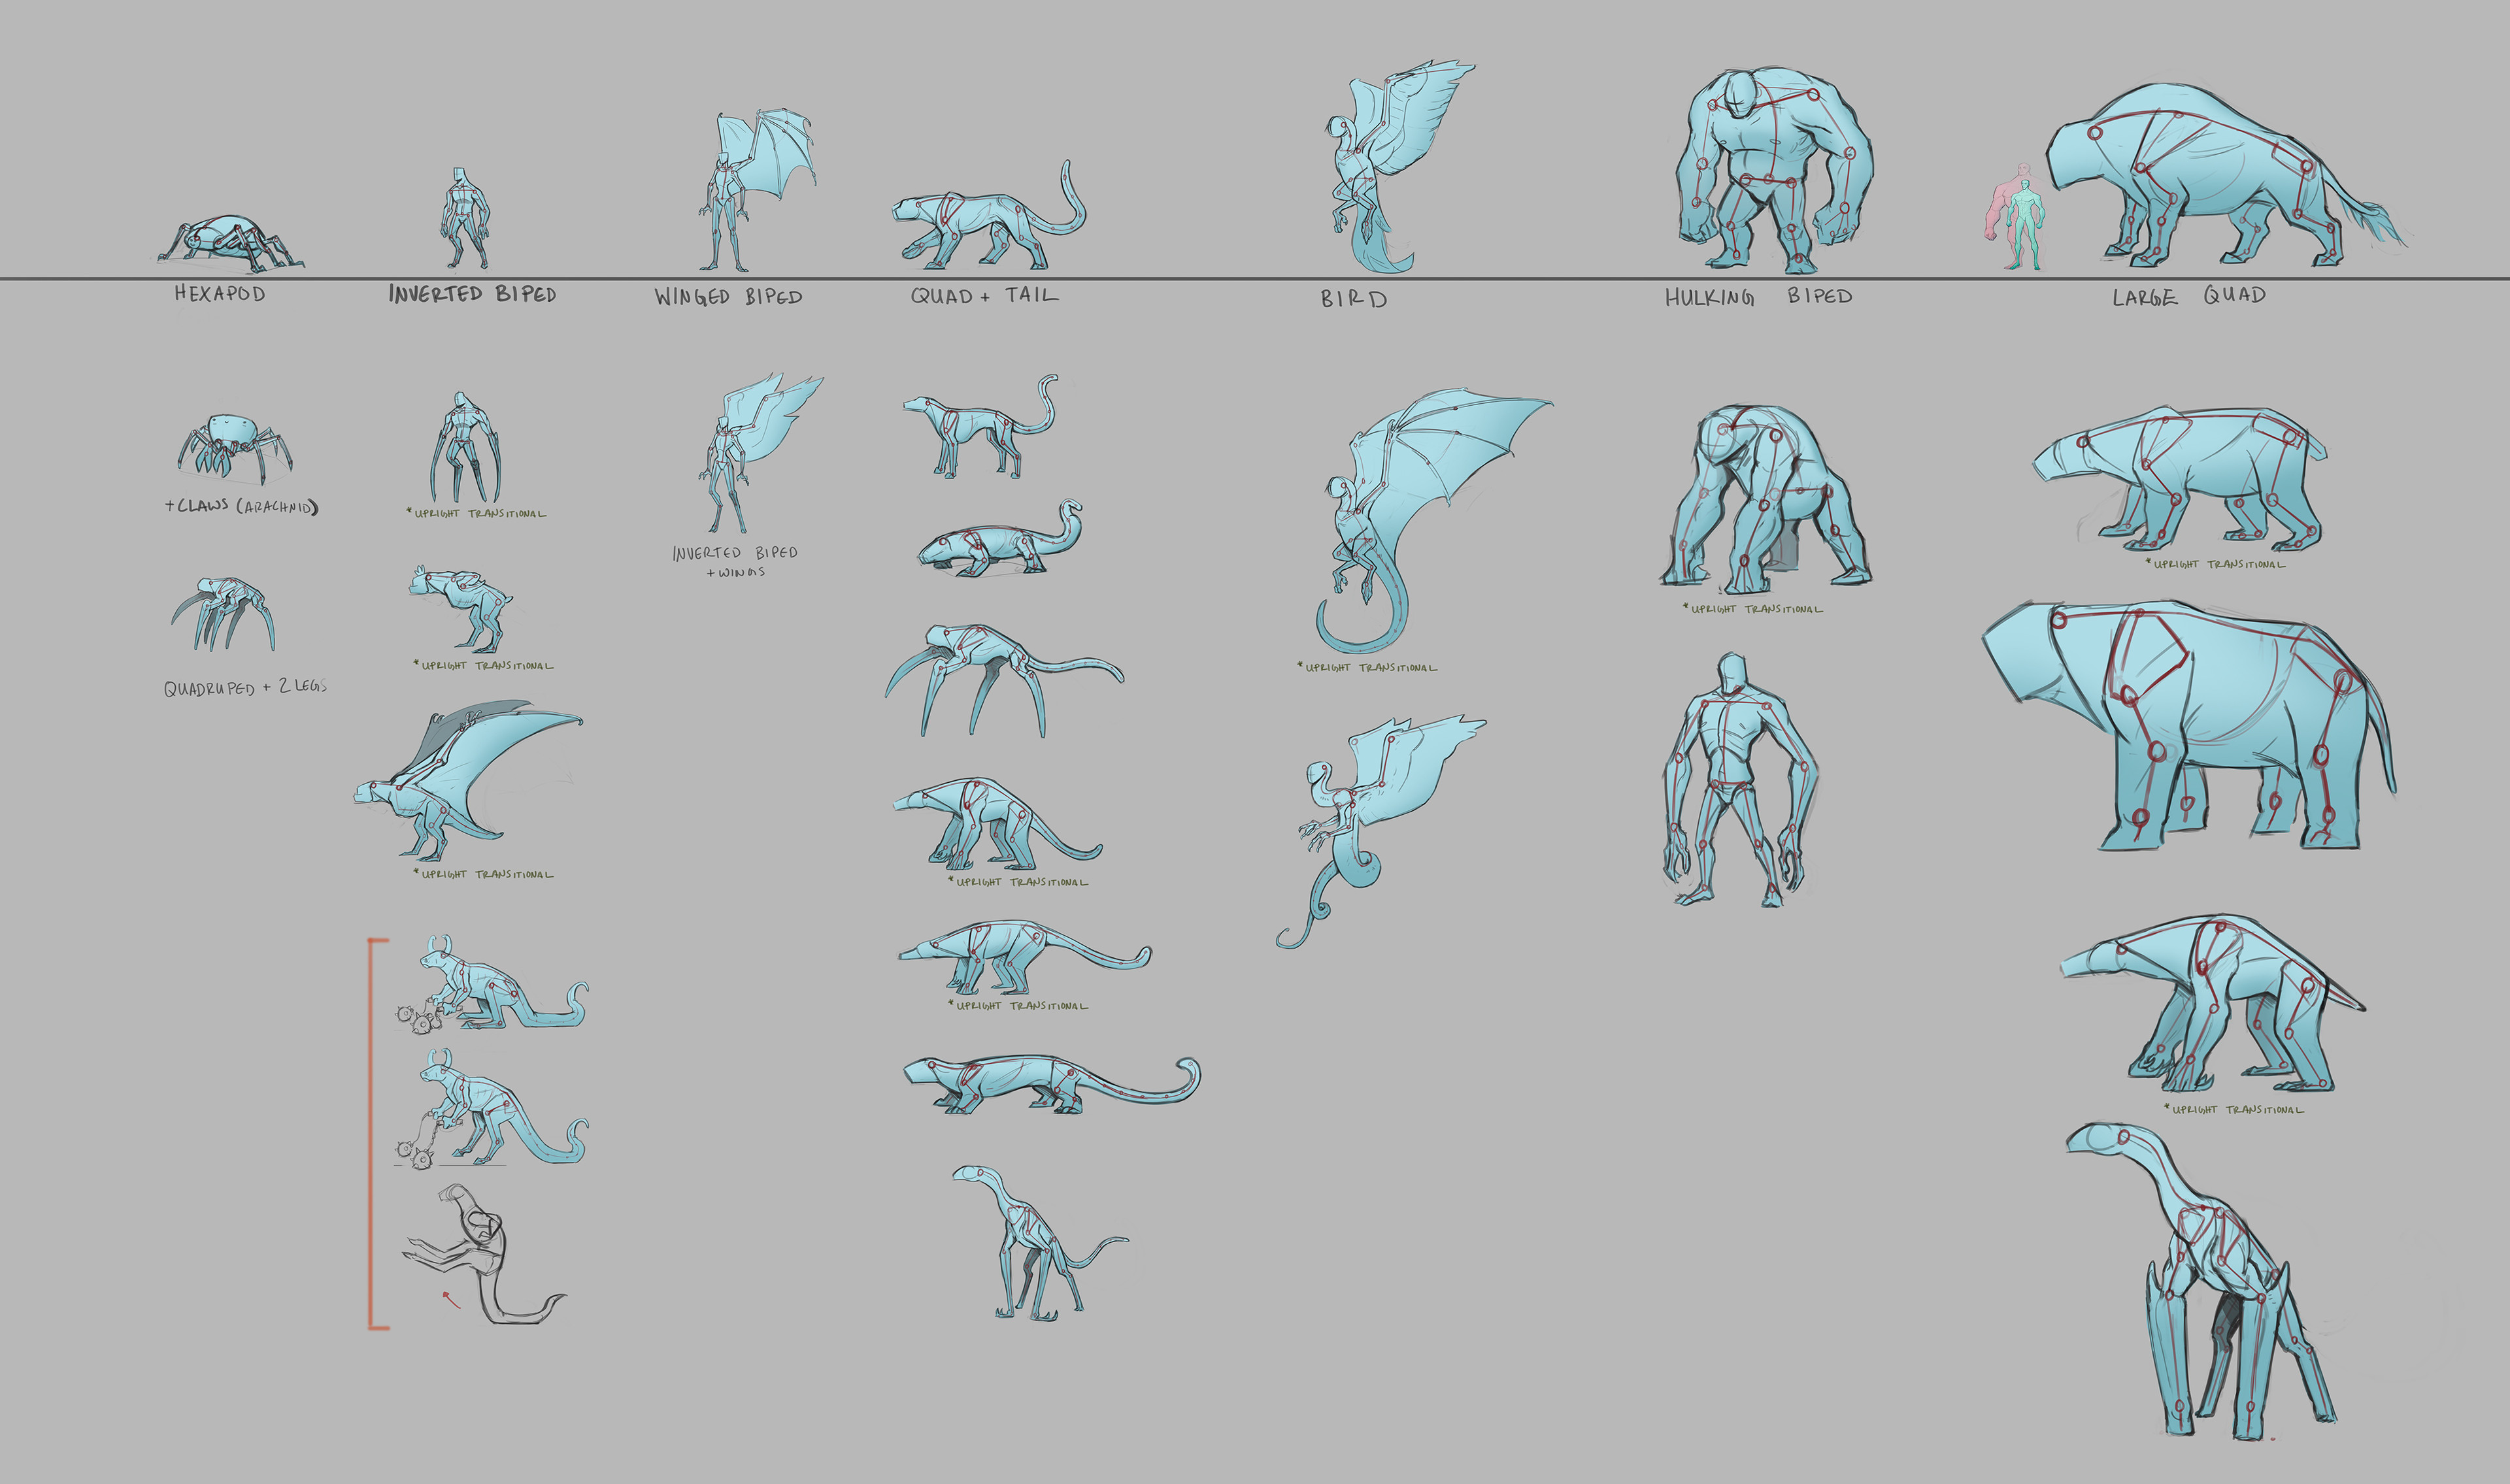 We wanted to maximize the monster rigs by fitting each with a basic body shape. This was a general exploration of different baselines that explored which would offer the most bang for buck. The weirder ones were nixed early on.